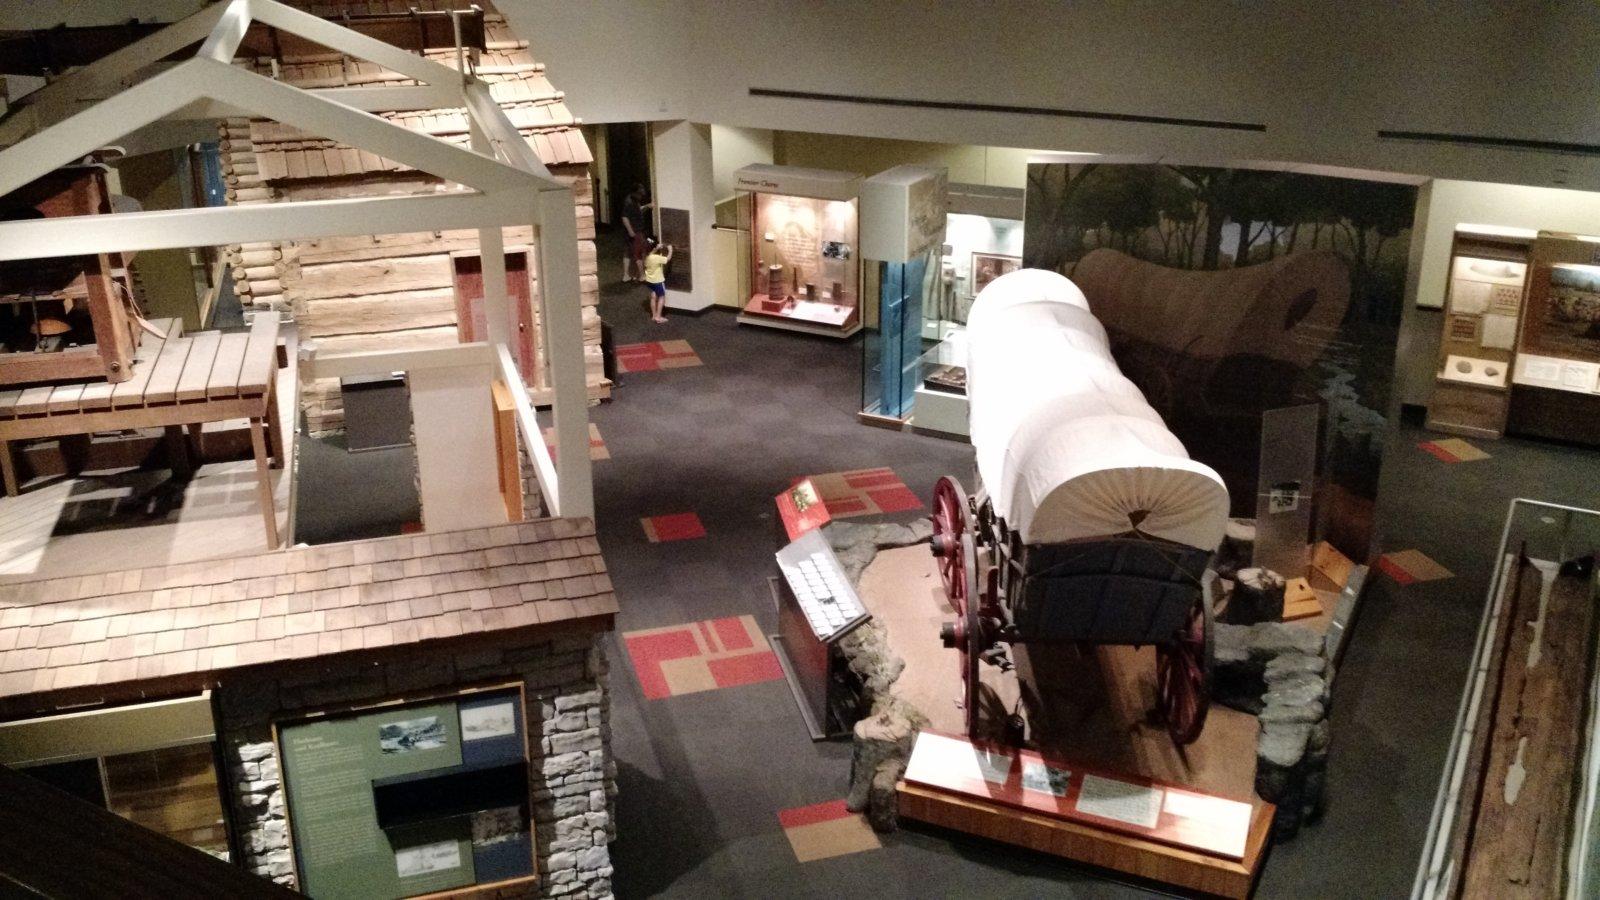 Wagons and houses and exhibits...oh my.